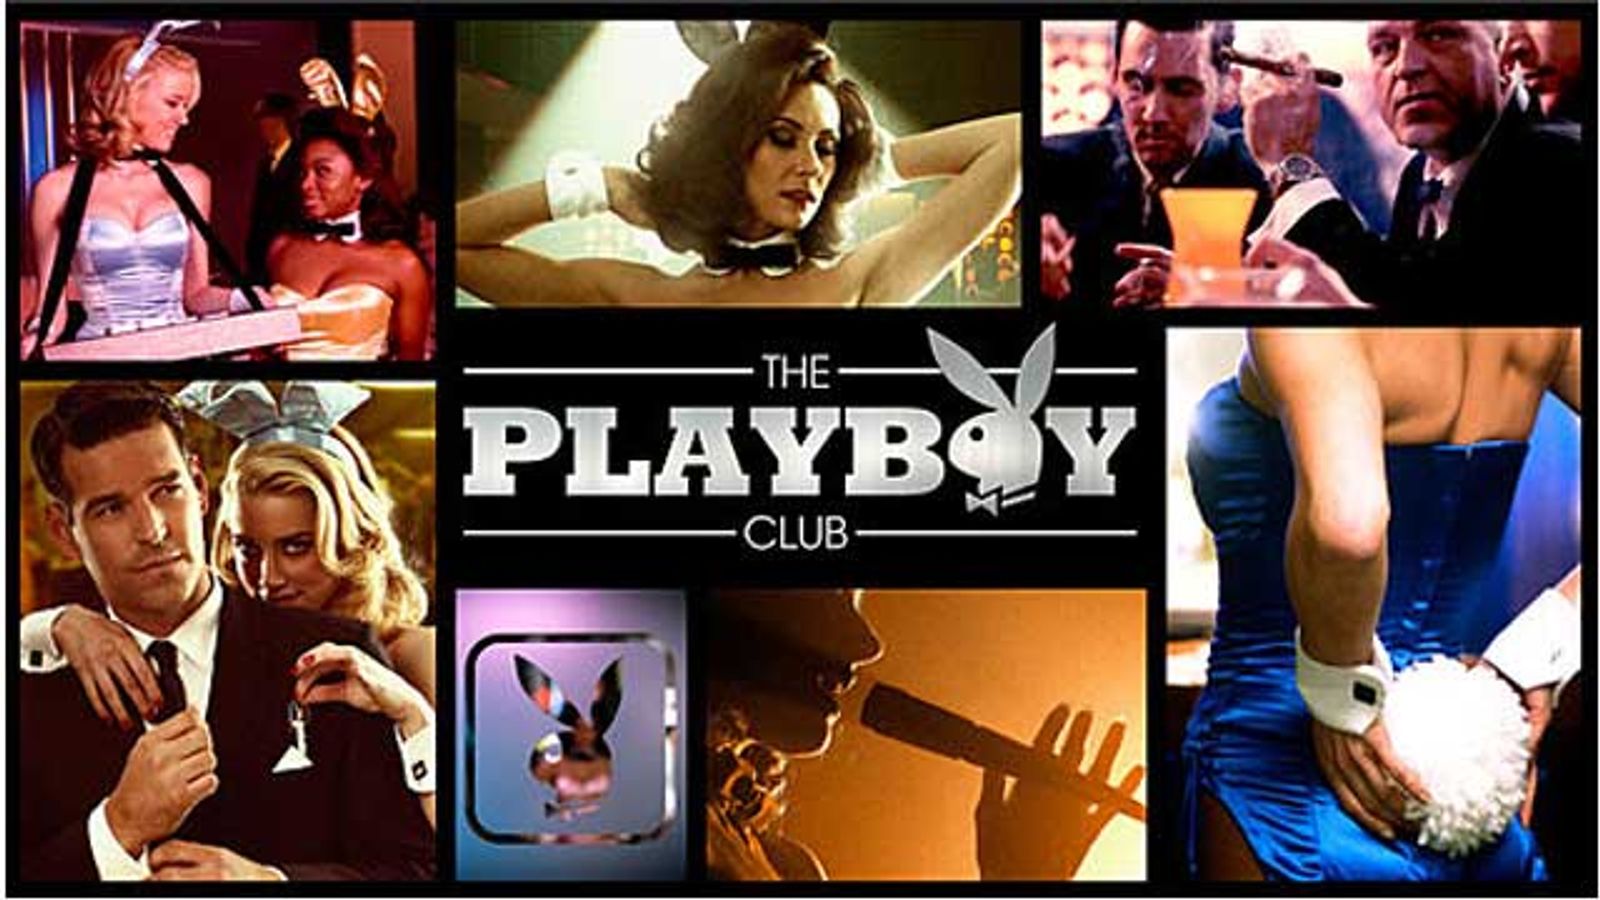 Salt Lake City NBC Affiliate Opts Out of 'The Playboy Club'